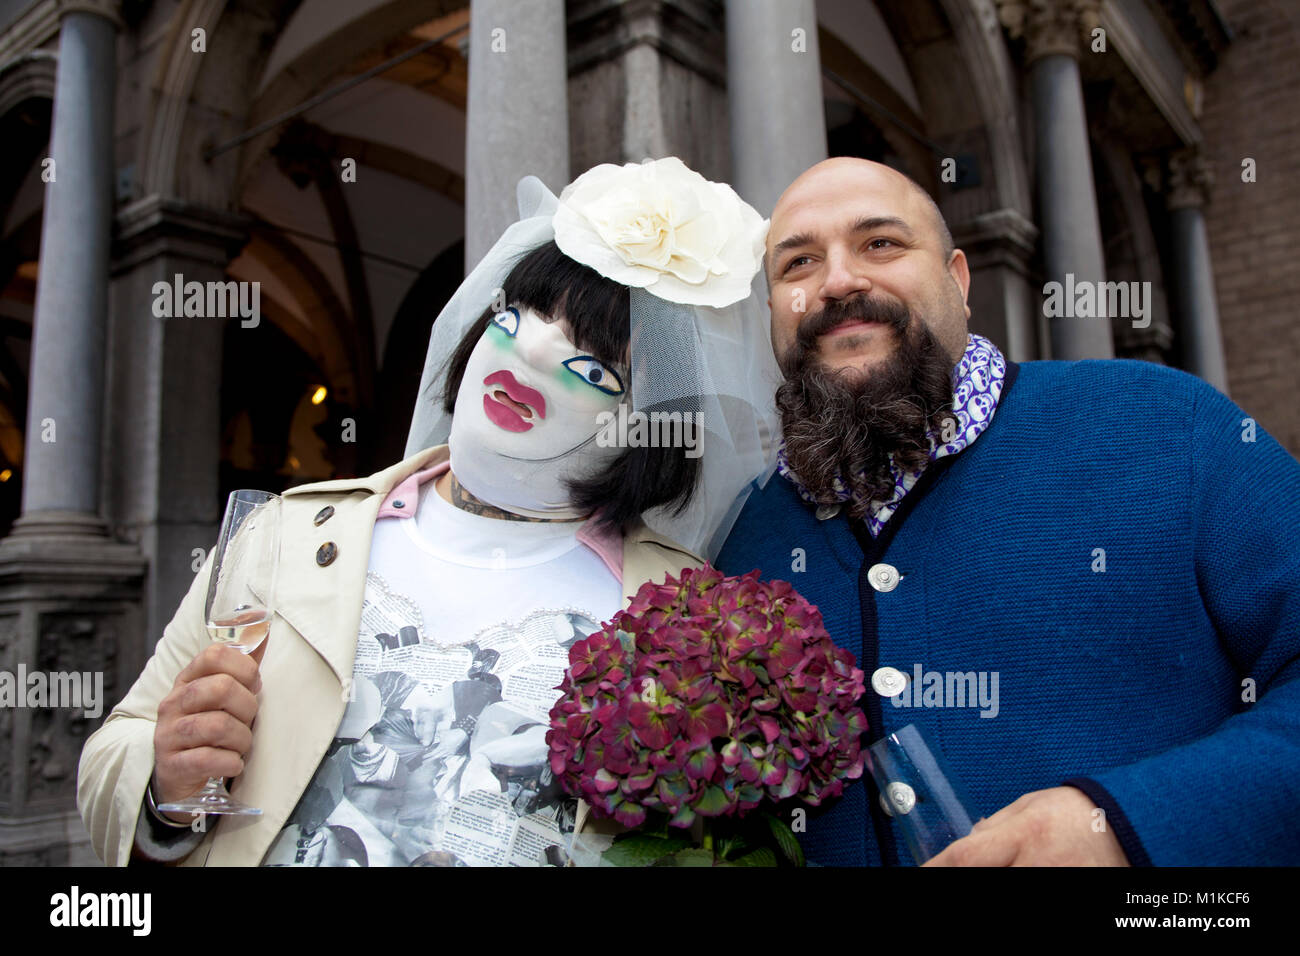 Europe, Germany, North Rhine-Westphalia, Cologne, carnival, bridal pair on November 11, 2011 (11.11.11, each year on this date the carnival starts) le Stock Photo